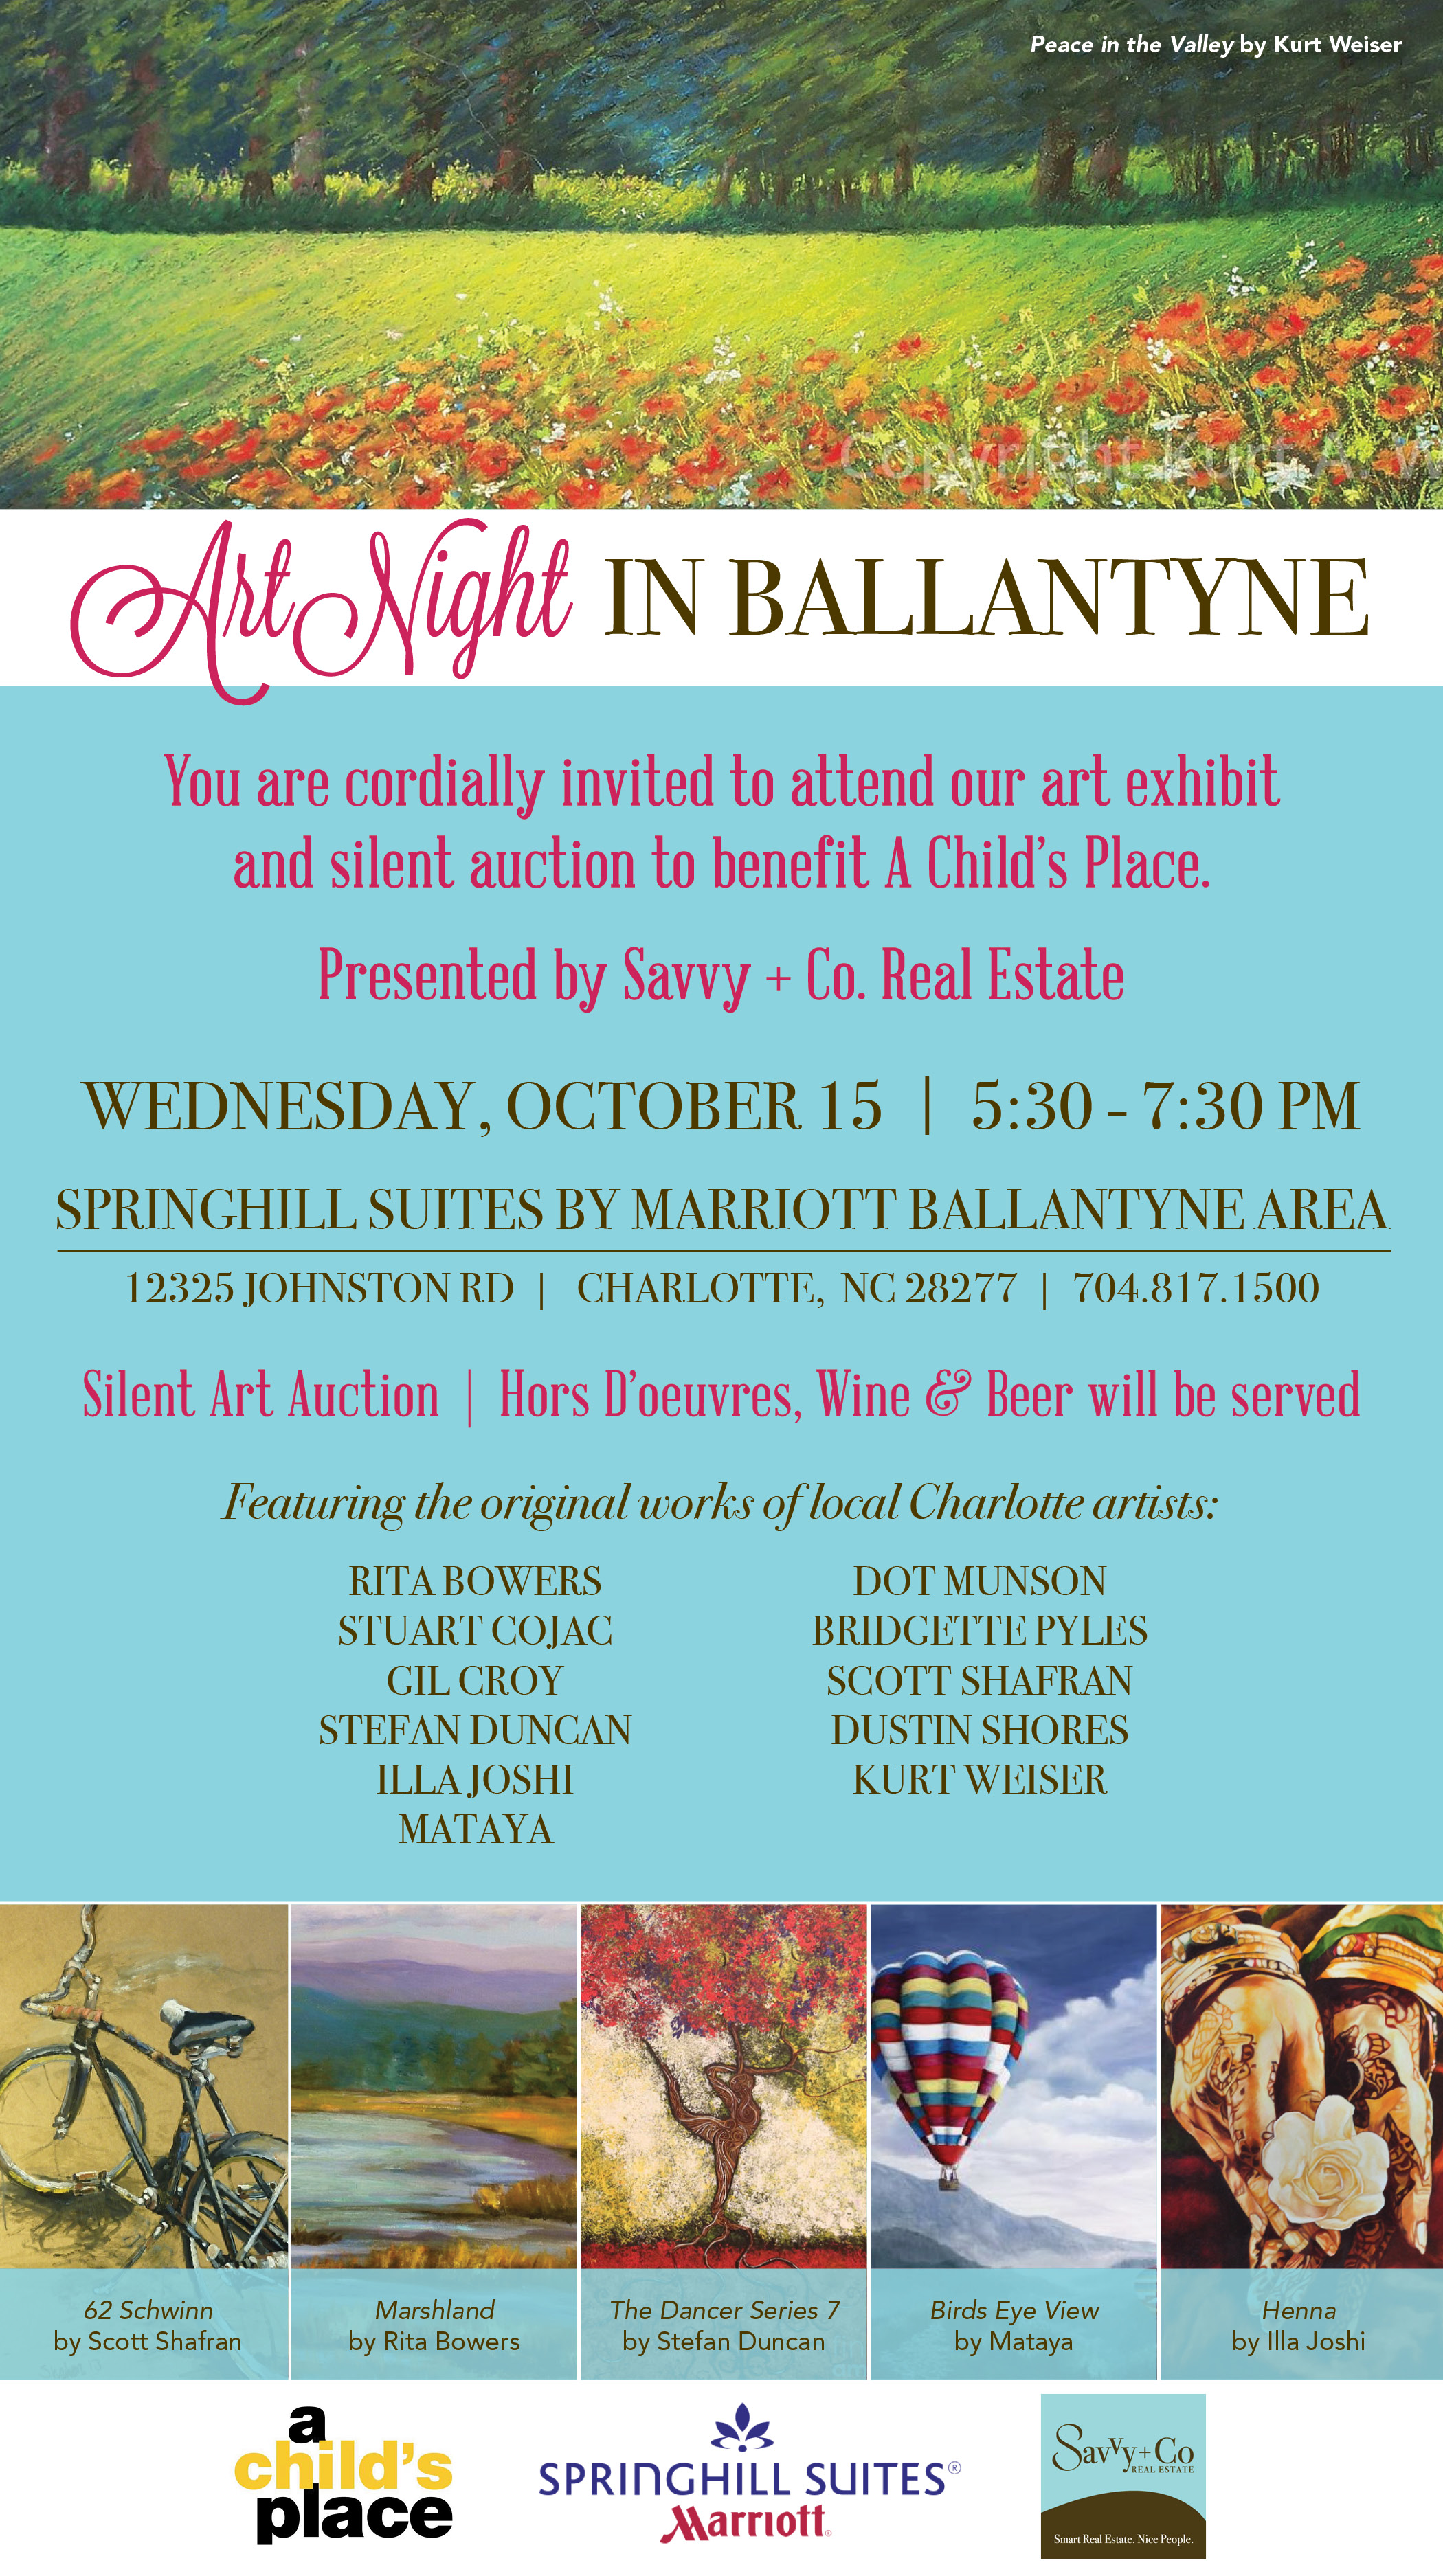 Invitation_Ballantyne Art and Real Estate Event_October 2014_Emailable Version